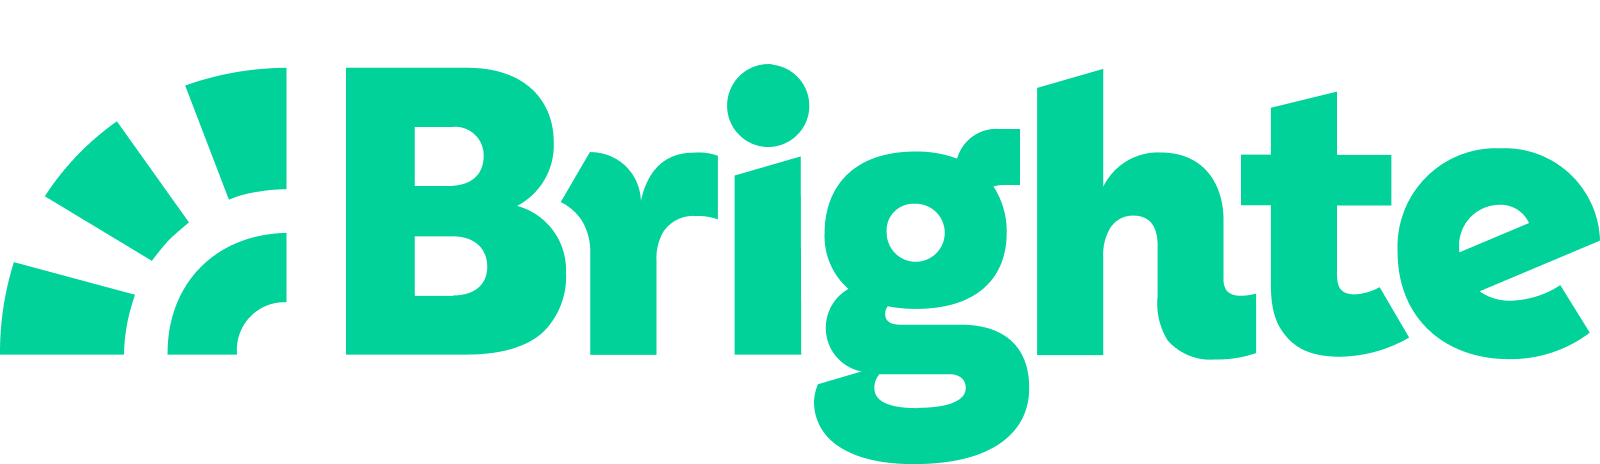 Brighte_logo_green.png